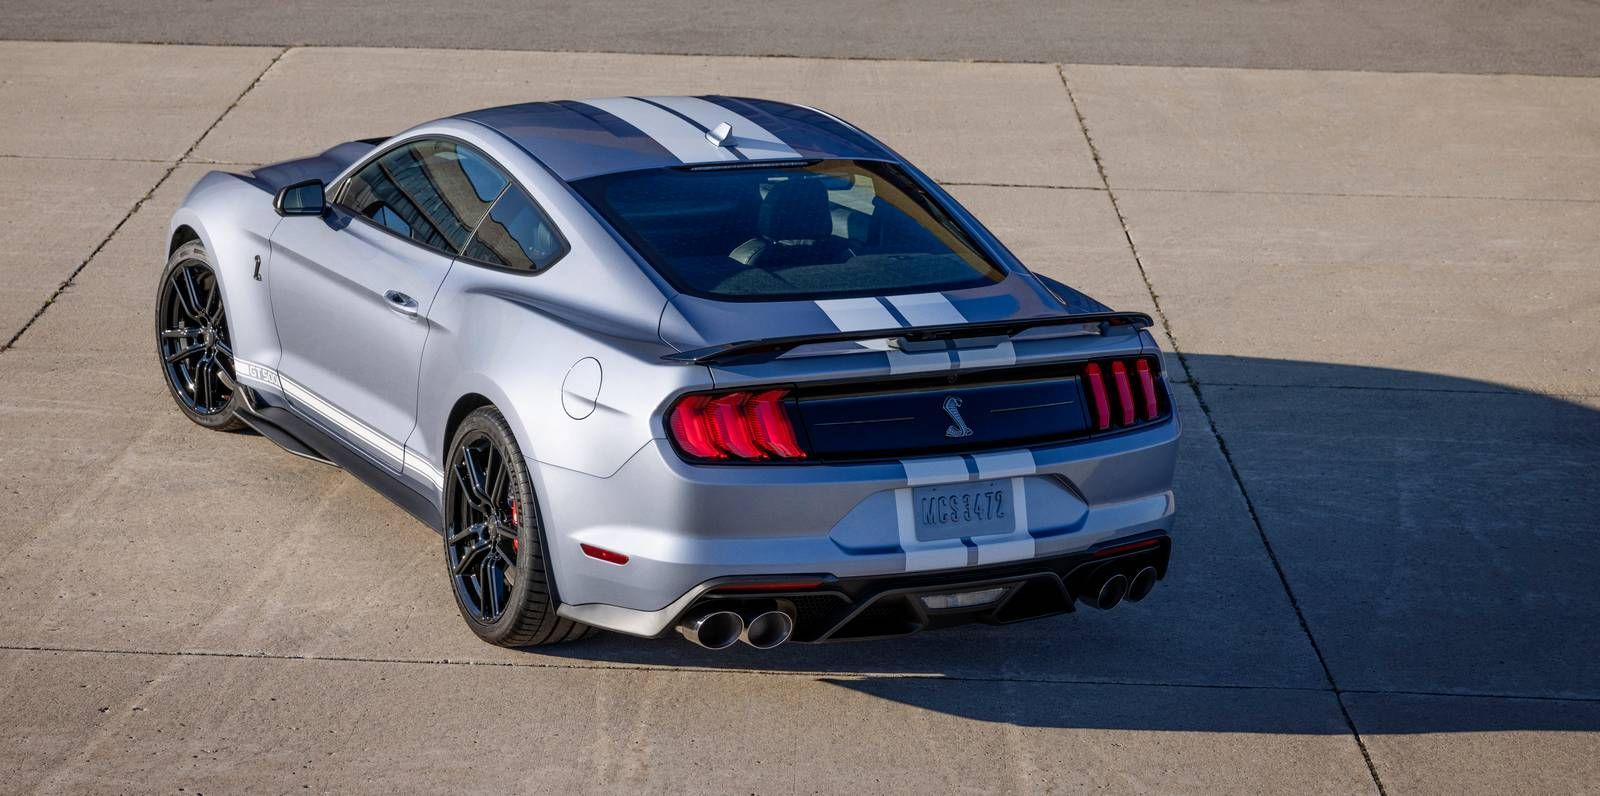 2022 Ford Mustang Shelby GT500, back view